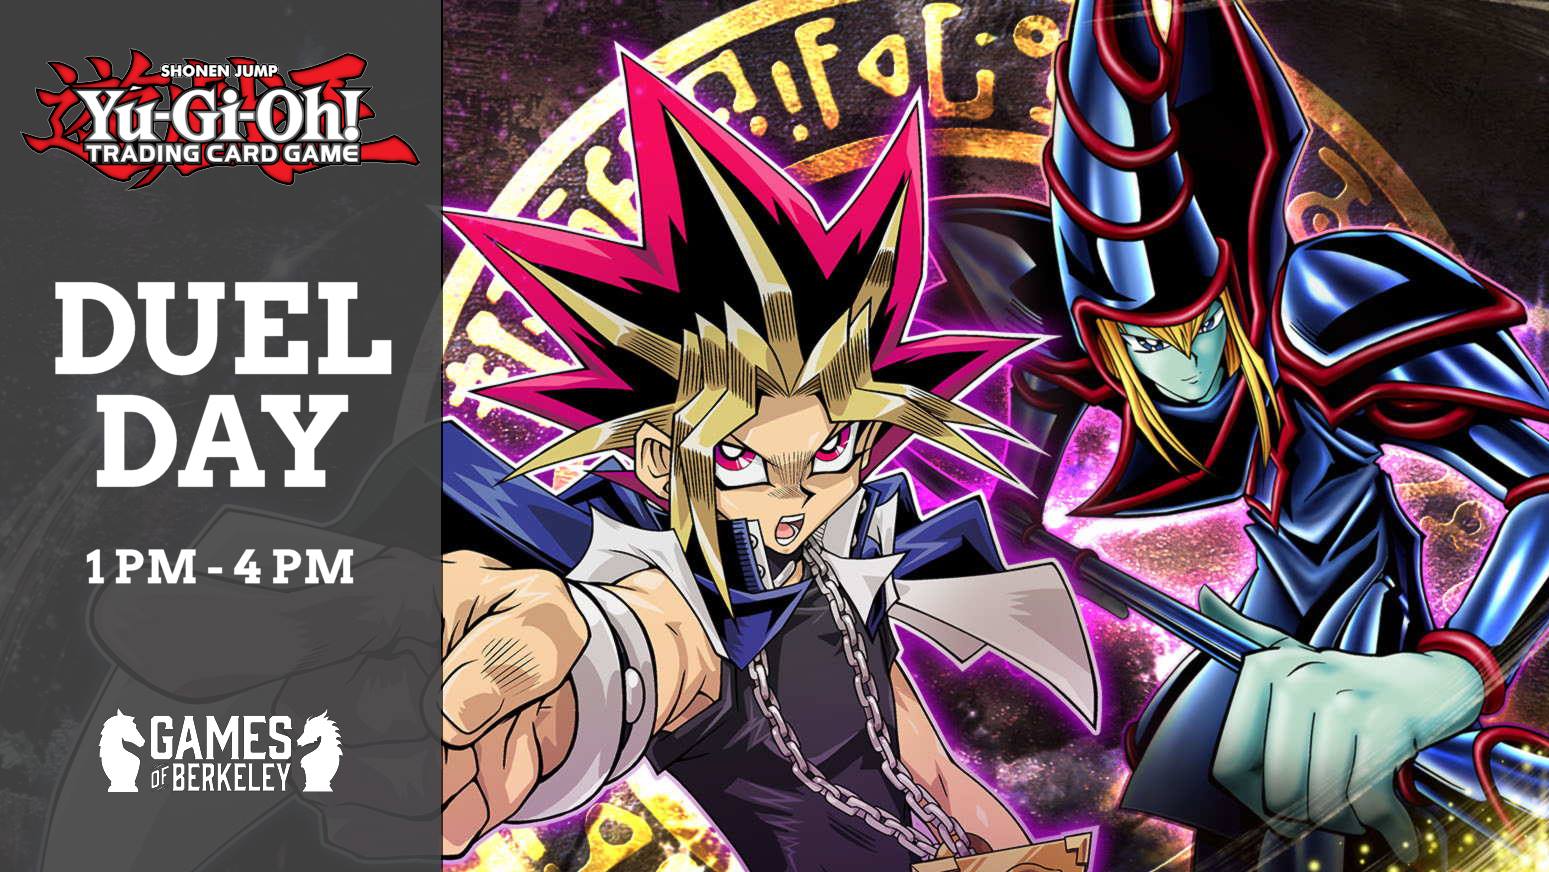 Yu-Gi-Oh! Duel Day